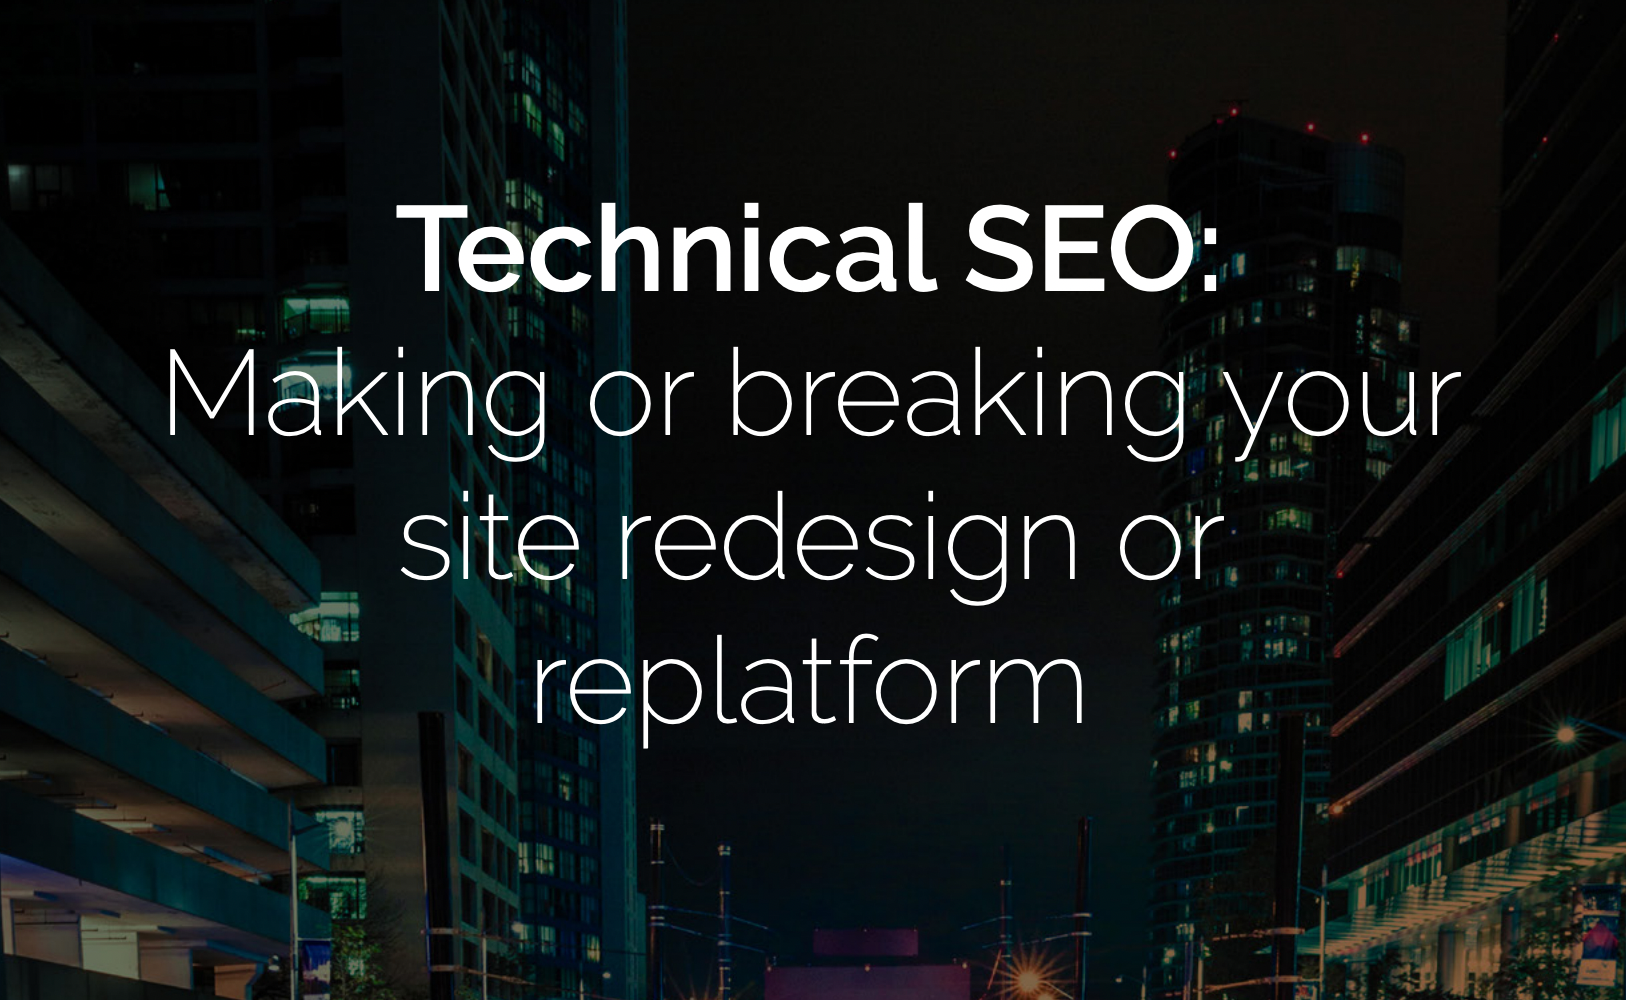 Technical SEO: Making or breaking your site redesign or replatform